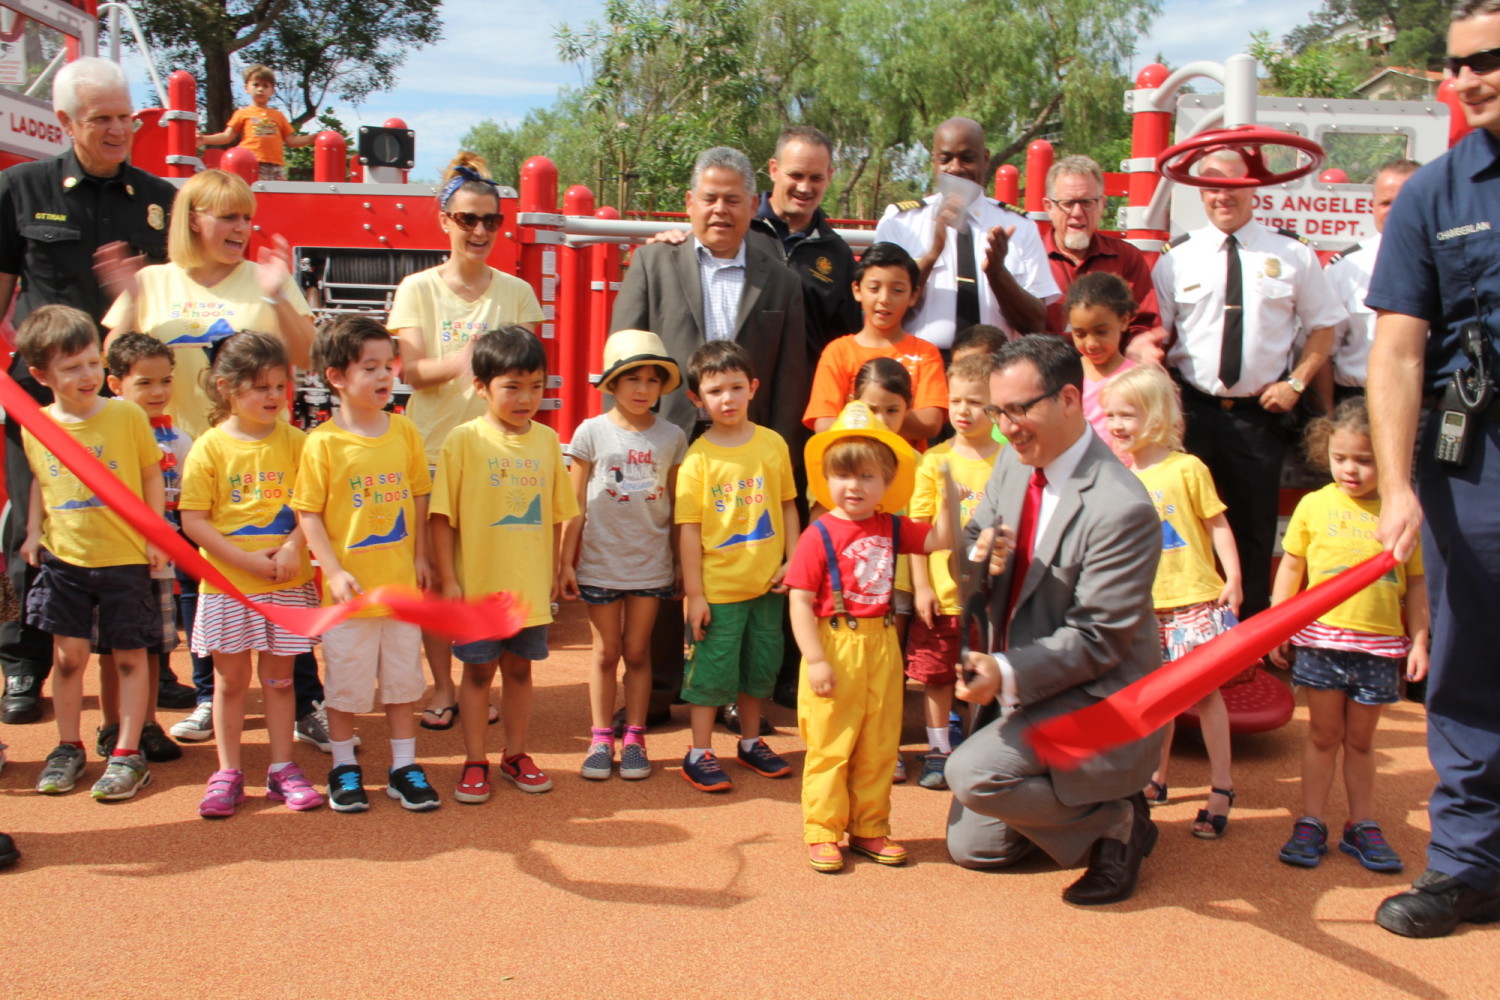 Constanso Ave Fire Station 84 Park's ribbon cutting ceremony on July 2.